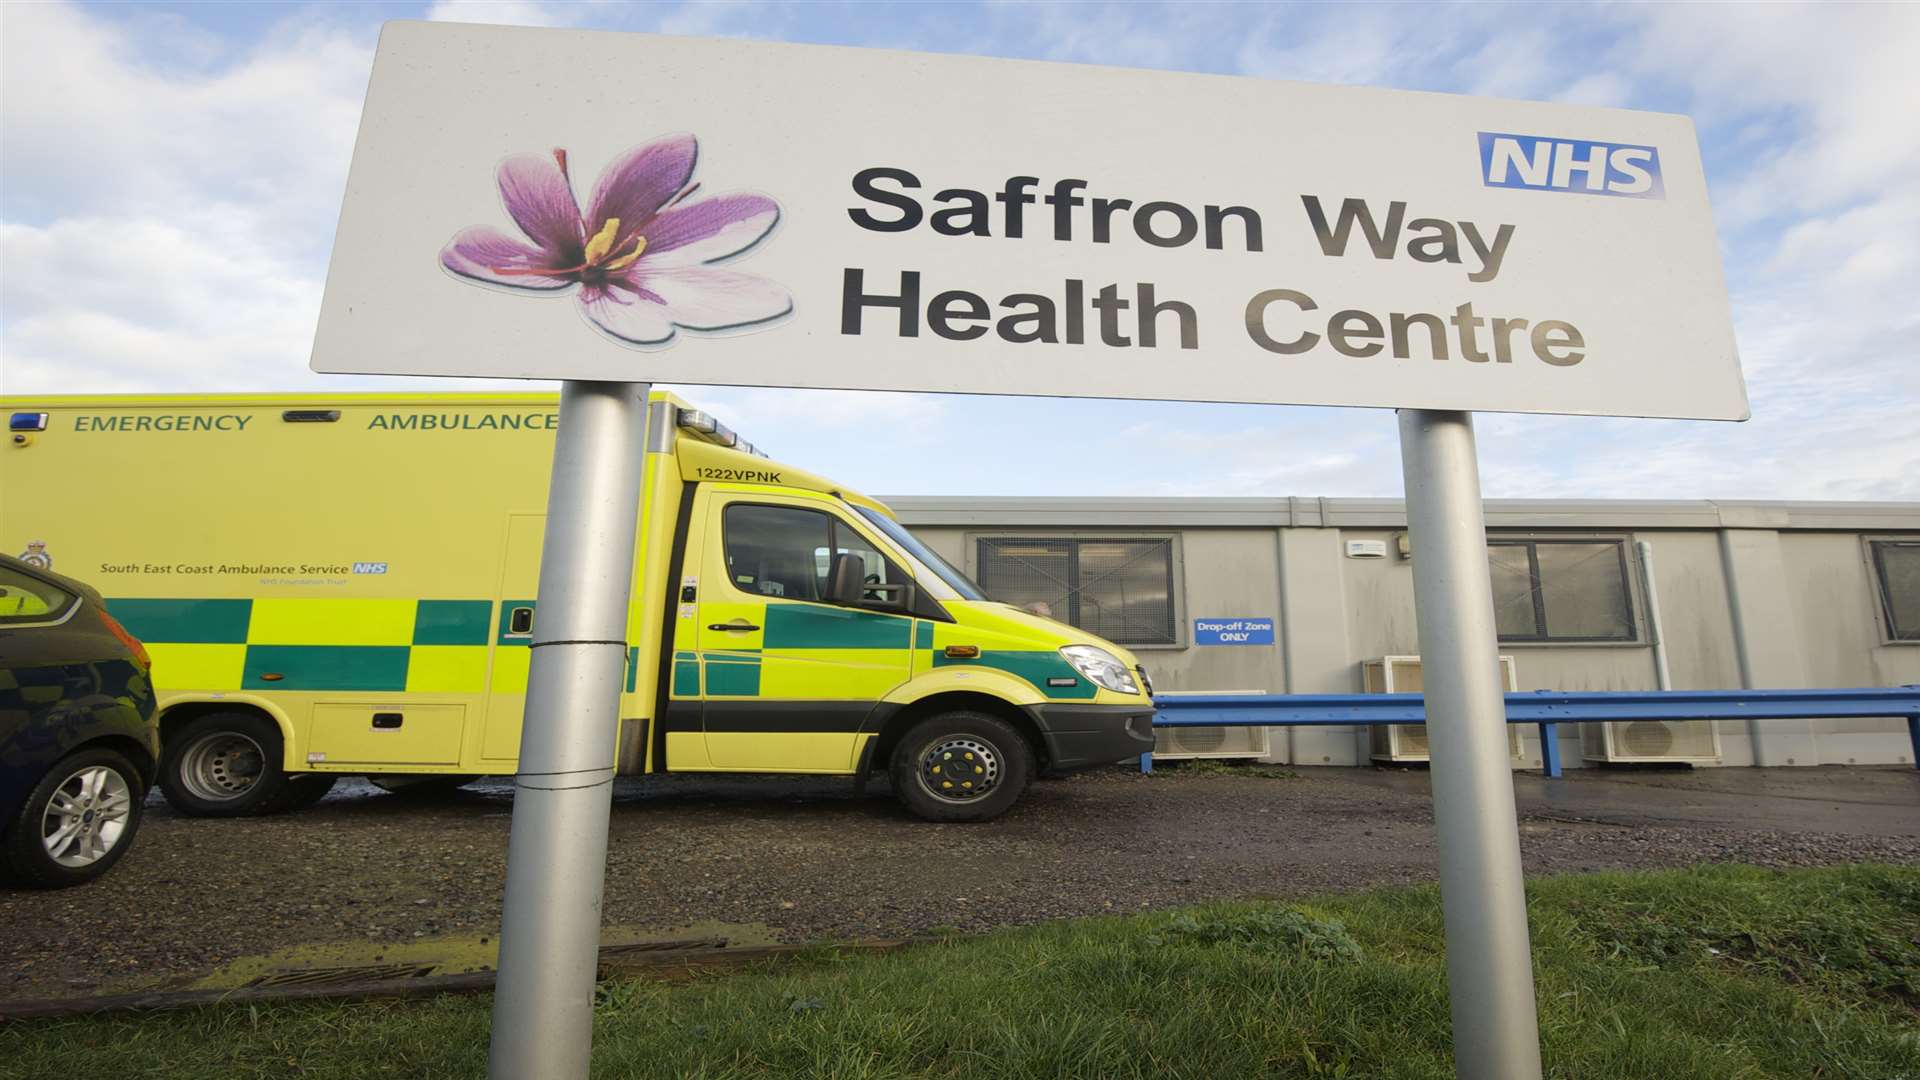 Saffron Way Health Centre should move to its new premises by the end of the month